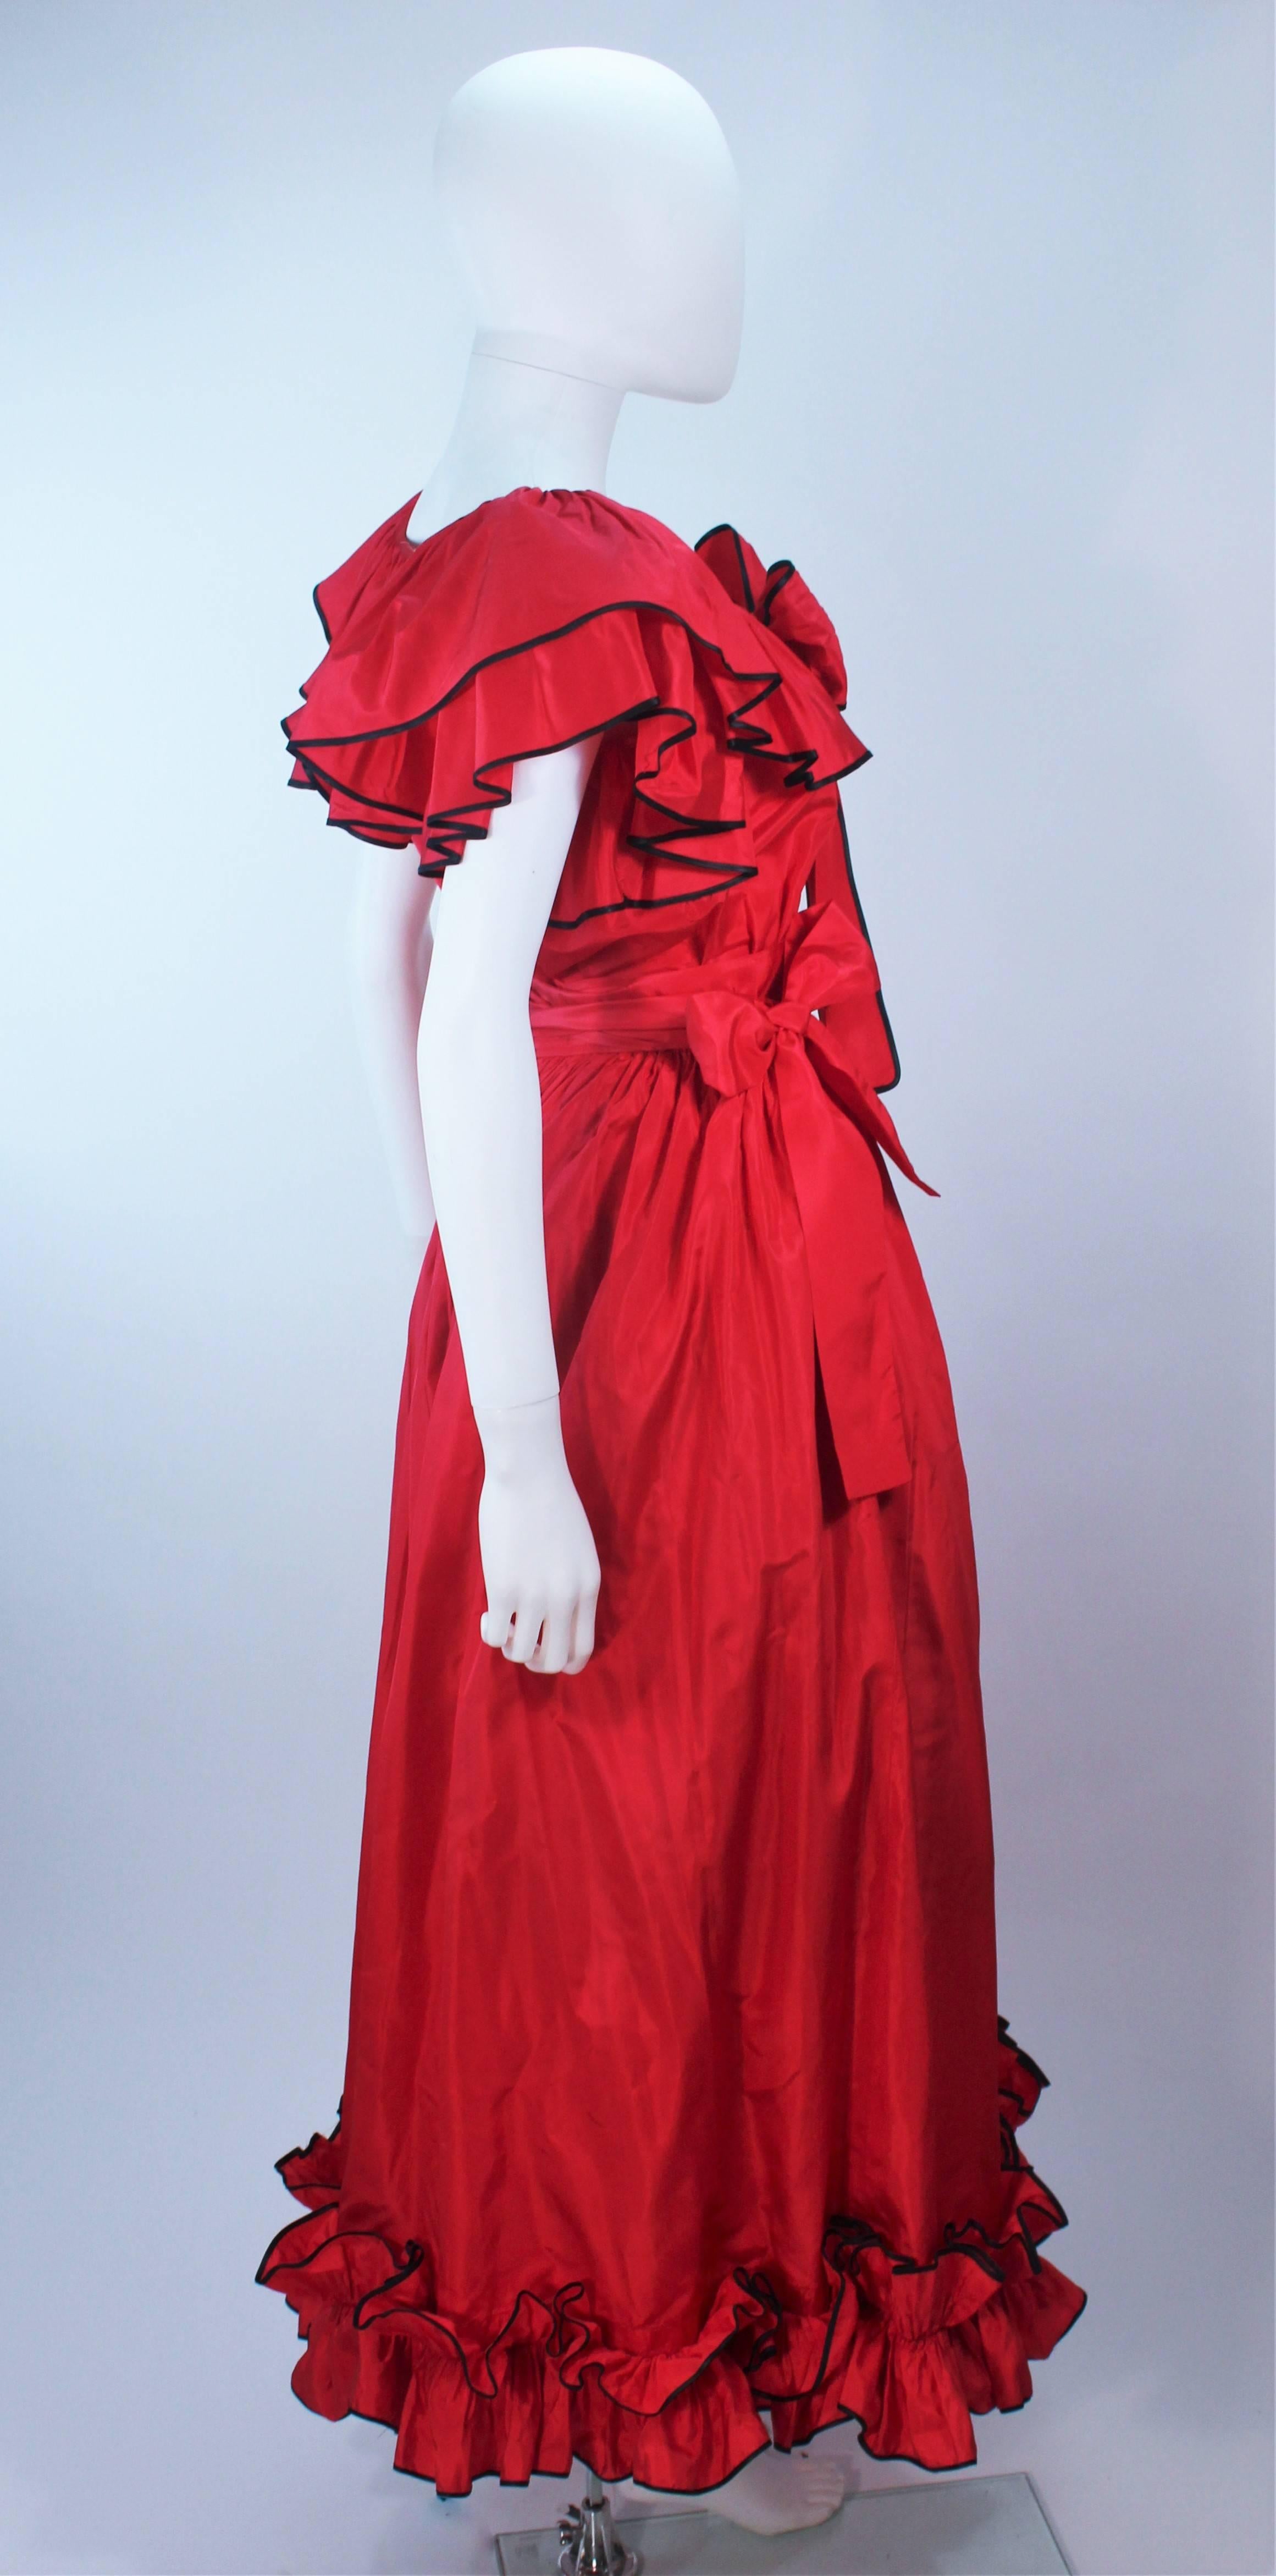 YVES SAINT LAURENT 1970's Red Satin Ruffled Ensemble with Black Trim Size 40 For Sale 1